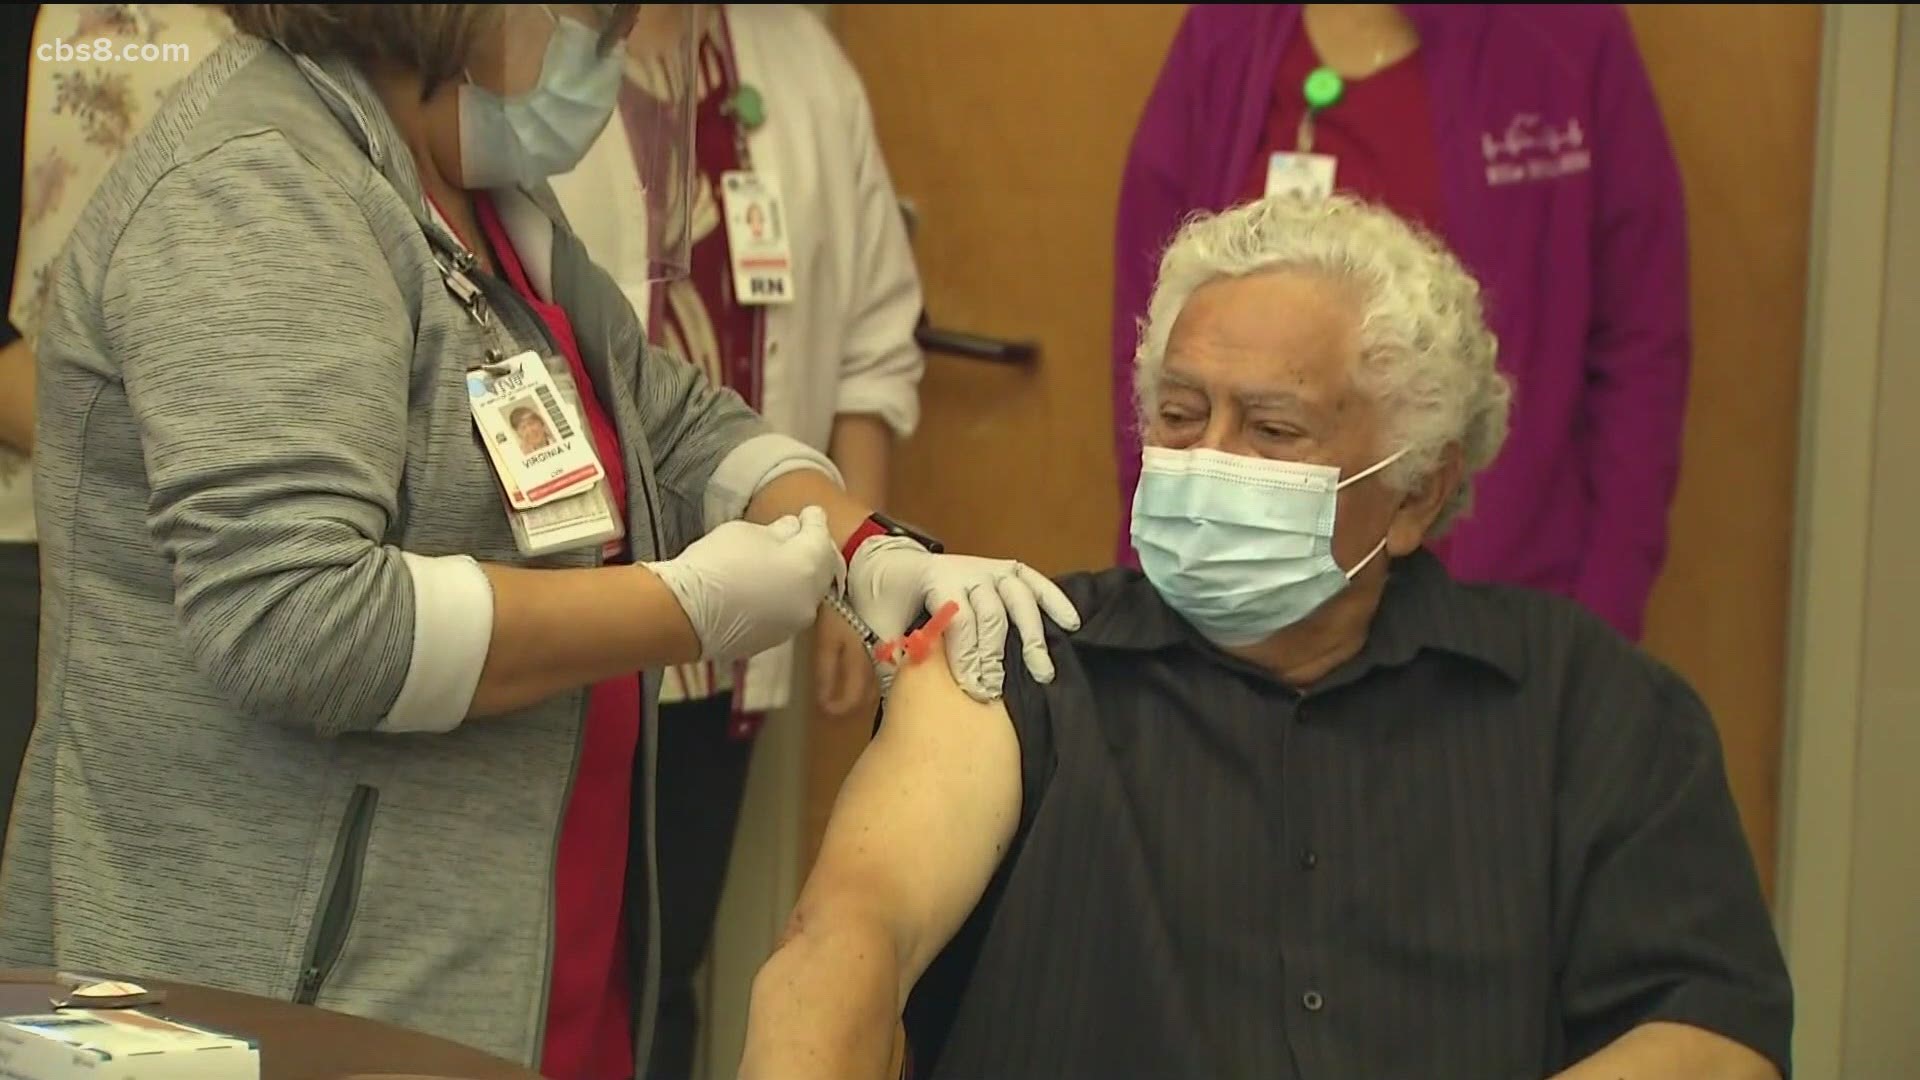 Carlos Alegre was the first person to receive his inoculation amid cheers from staff at the facility.